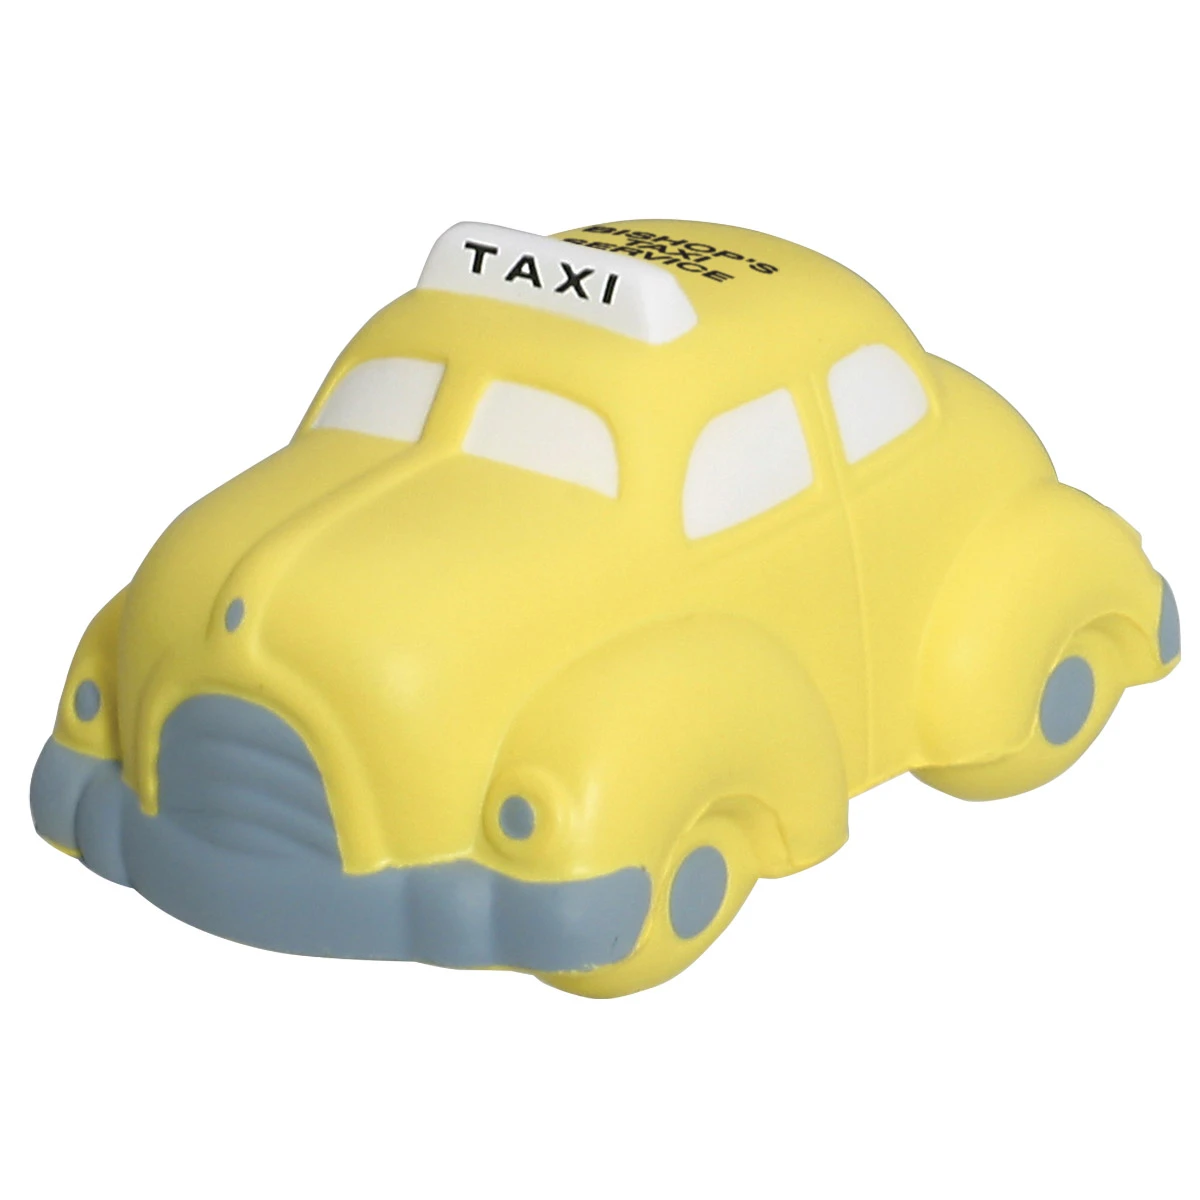 Promotional Taxi Stress Ball